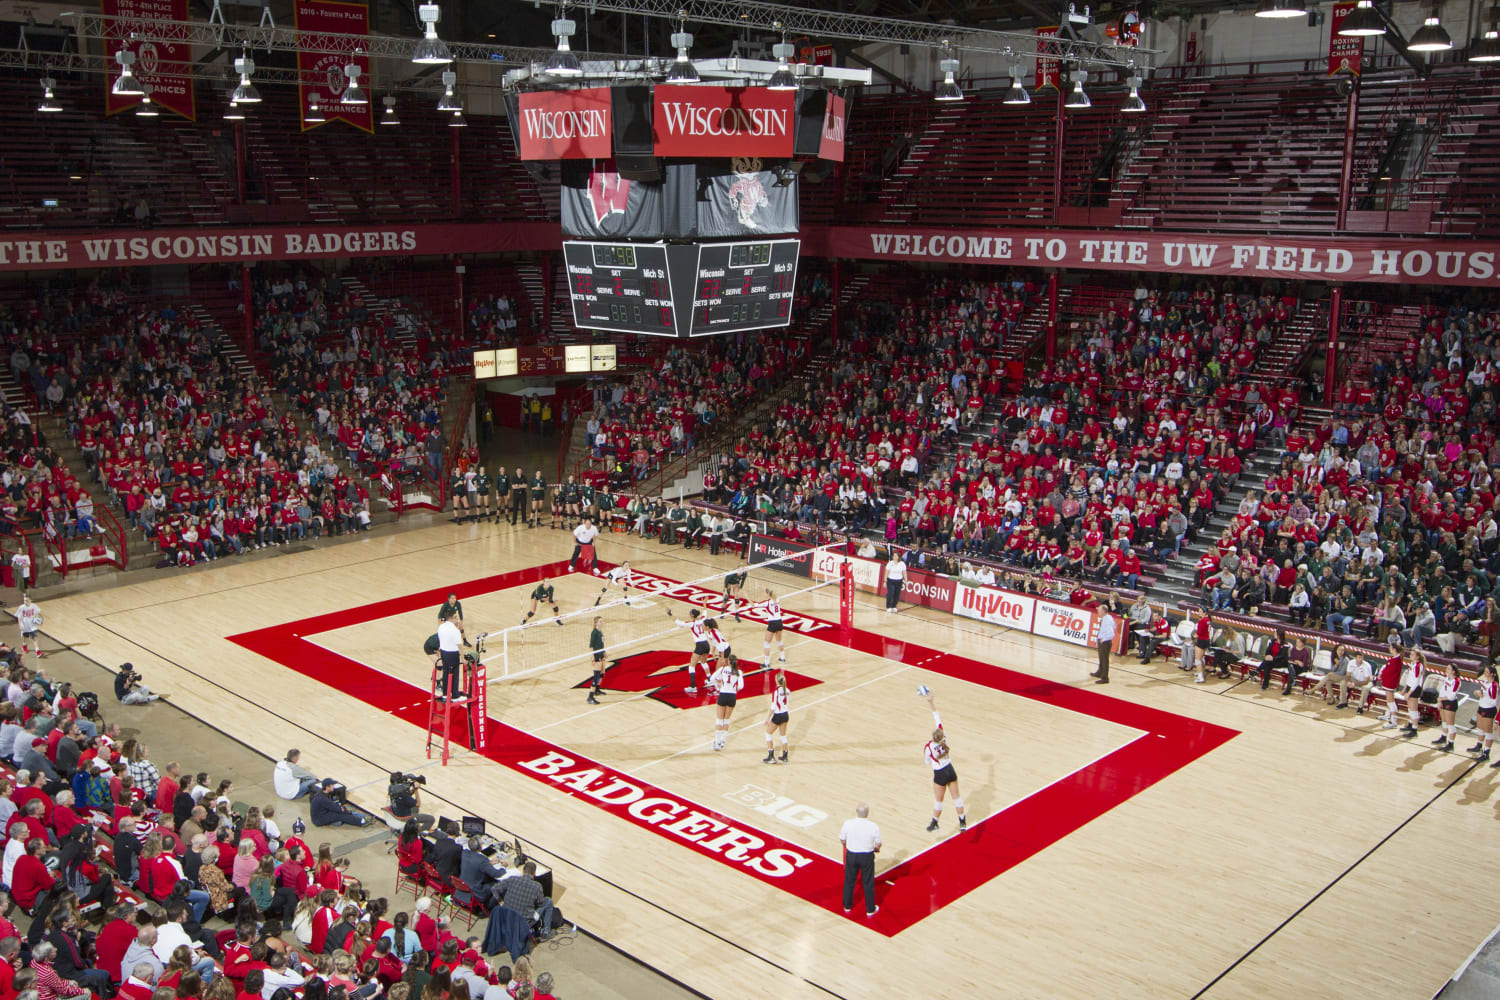 University of Wisconsin police investigating after private photos and videos of womens volleyball team are shared online